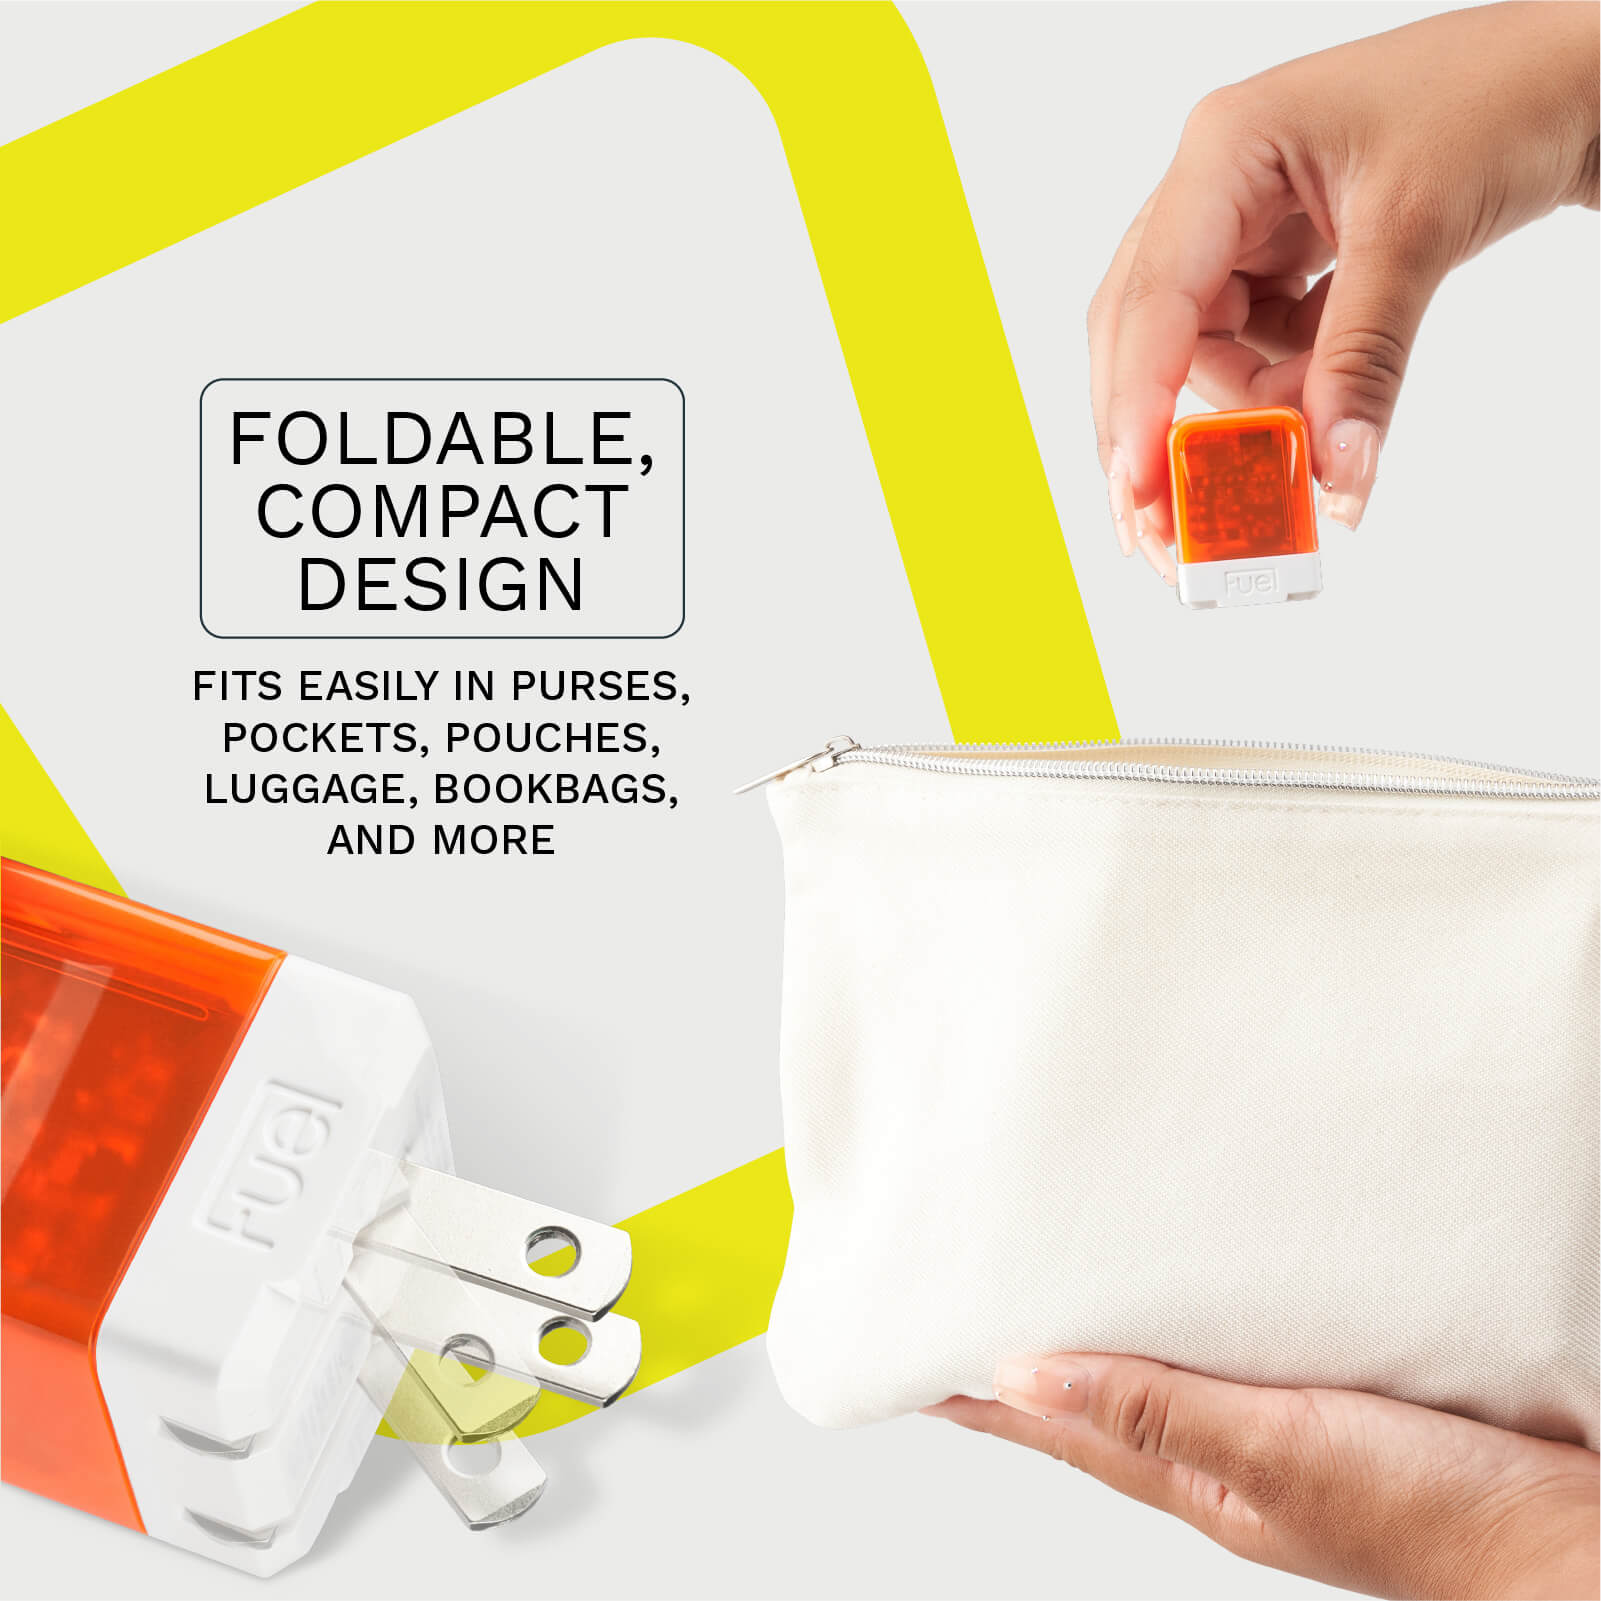 FOLDABLE, COMPACT DESIGN. FITS EASILY IN PURSES, POCKETS, POUCHES, LUGGAGE, BOOKBAGS, AND MORE color::Vibrant Orange